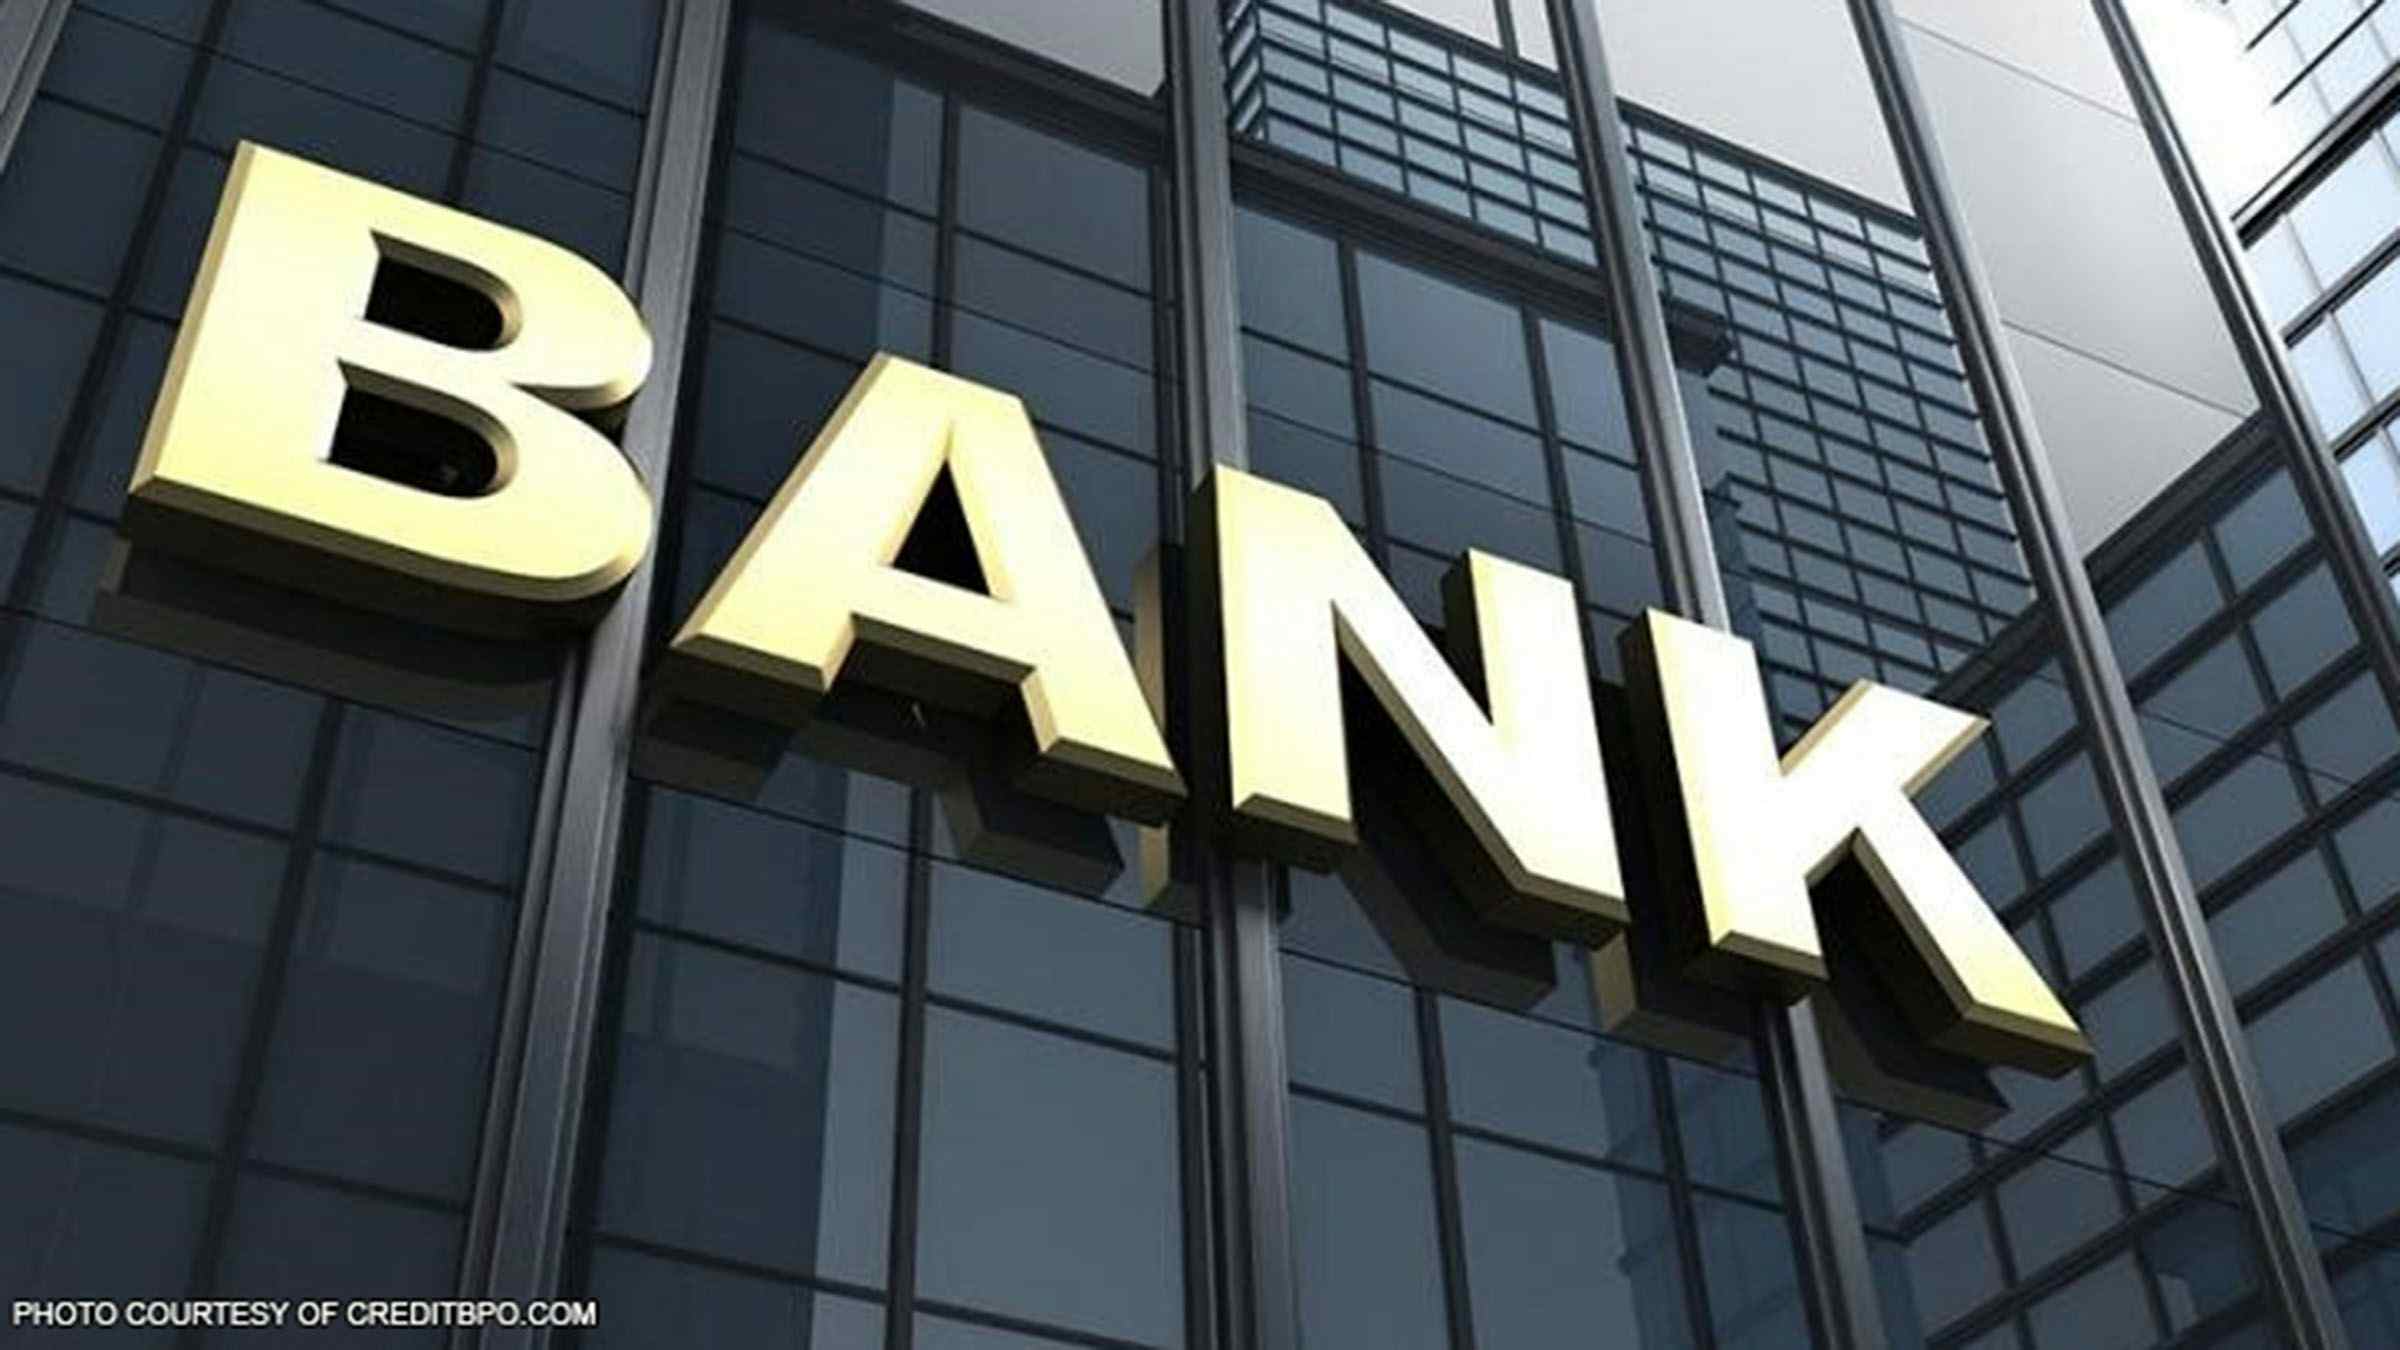 Phl. banks to profit from rising interest rates, stable credit costs